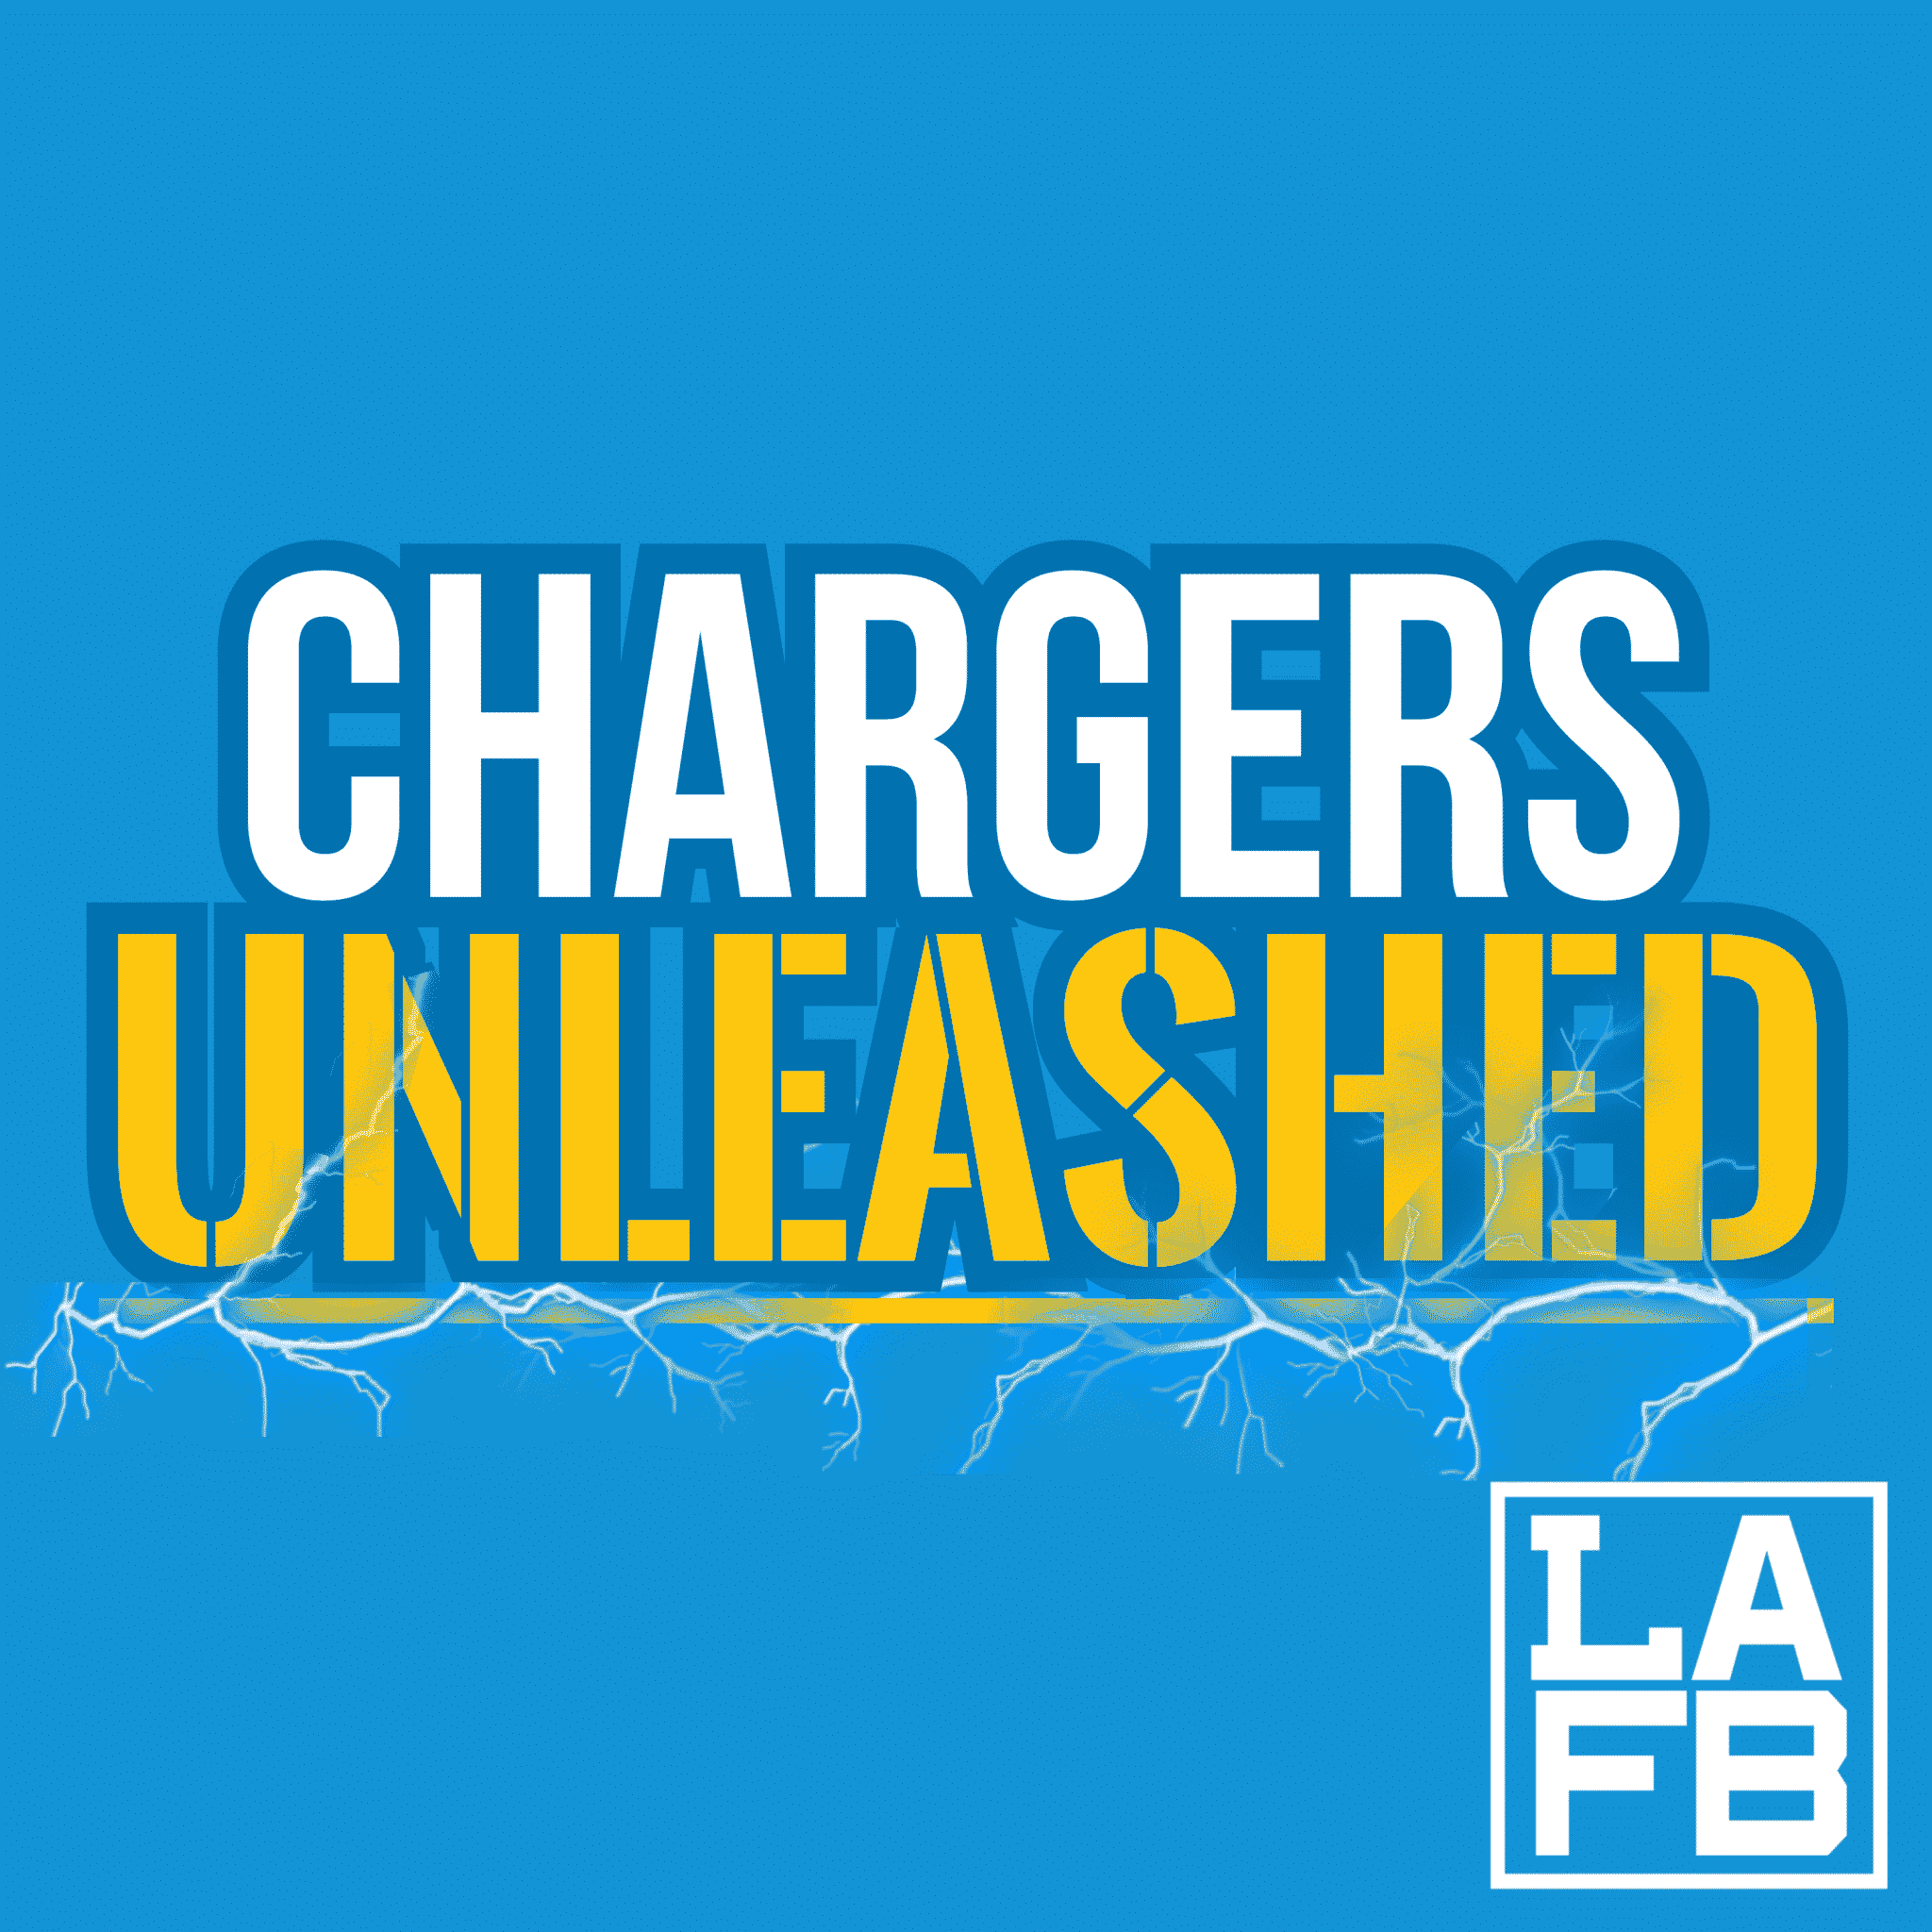 Chargers Unleashed: LA Chargers 2022 Offseason Preview | Free Agency & NFL Draft | What Is Team’s Top Priority?